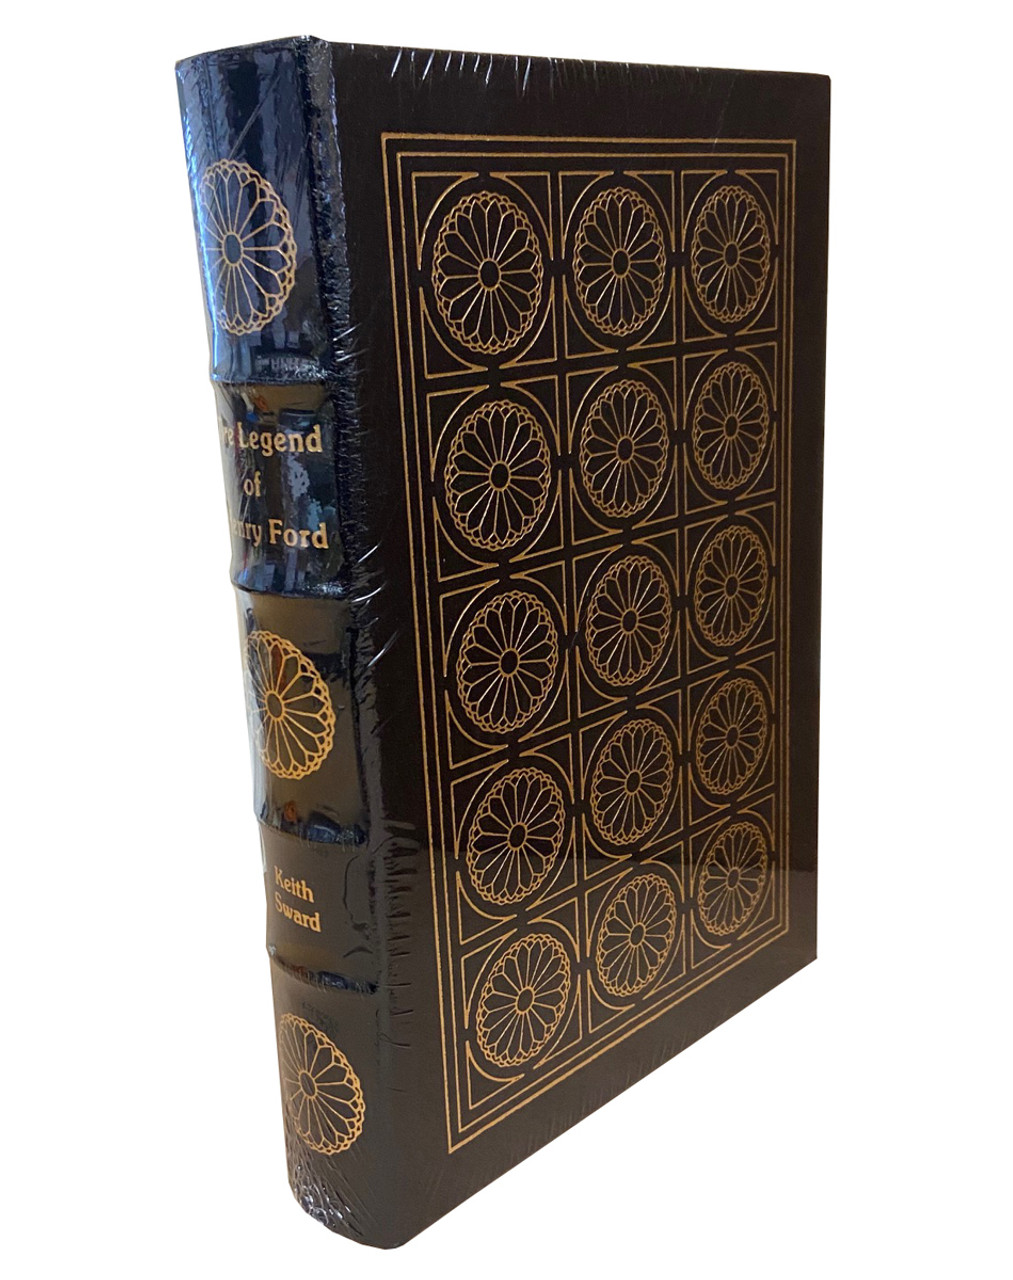 Keith Sward "The Legend of Henry Ford" Leather Bound Collector's Edition, Limited Edition [Sealed]